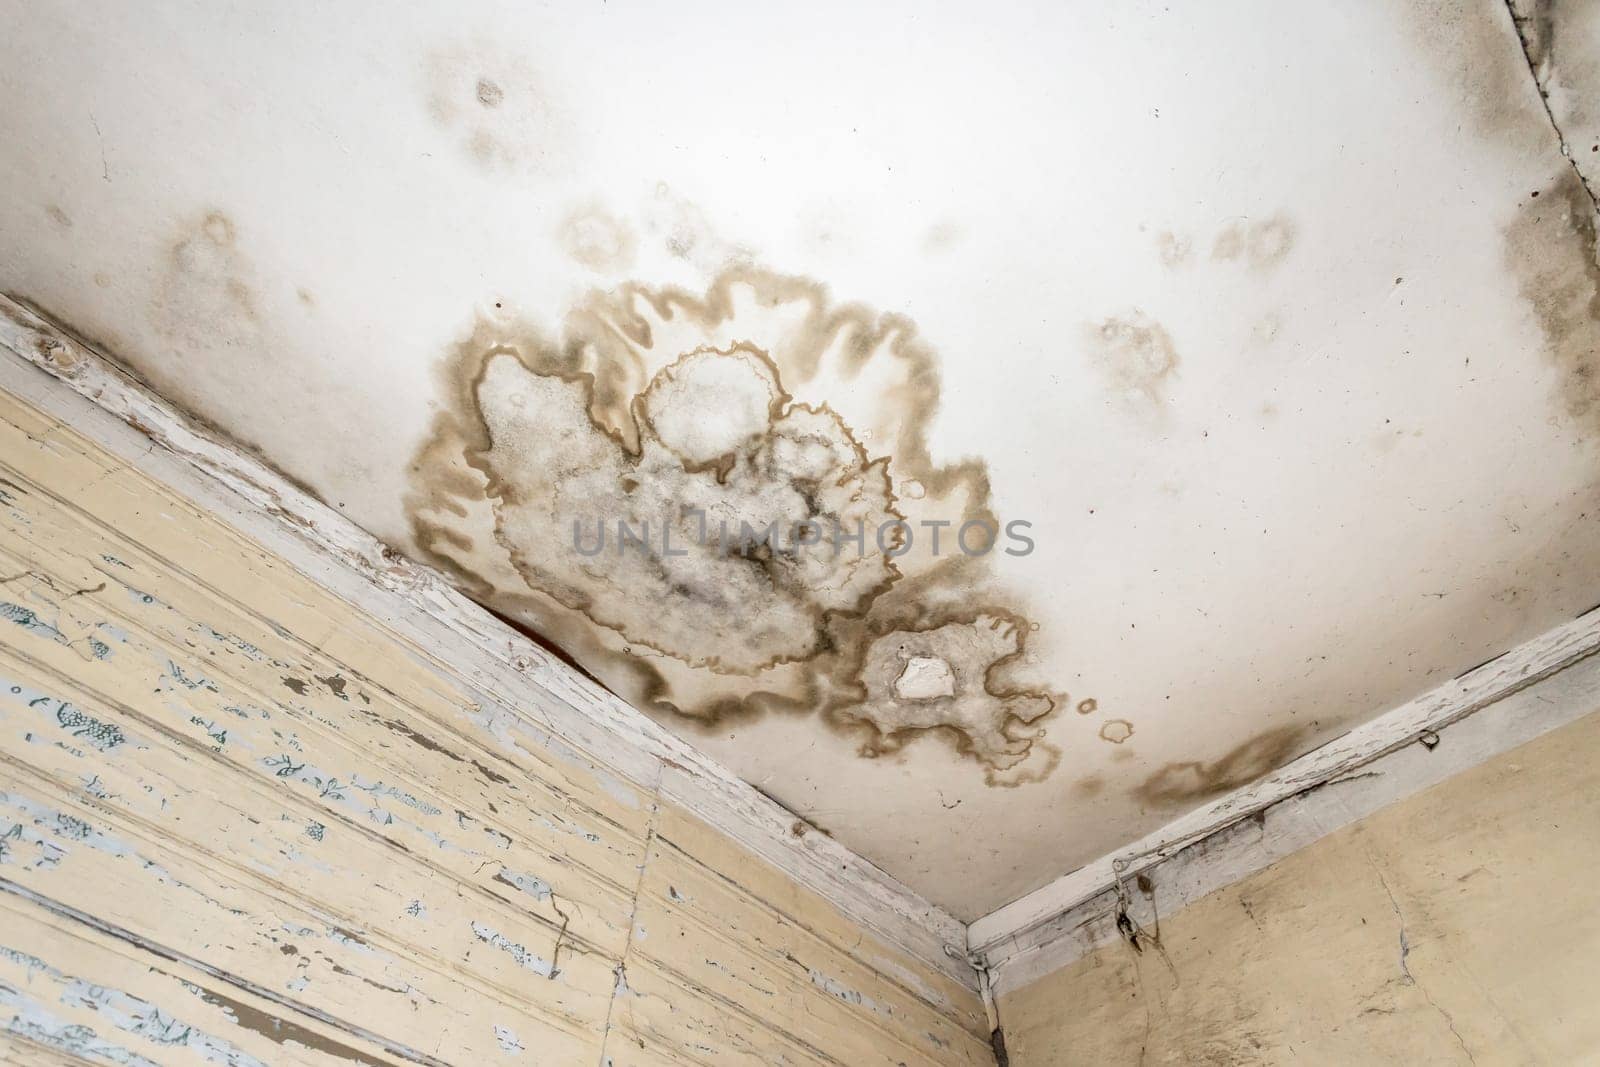 Mold spots on the ceiling or wall by germanopoli